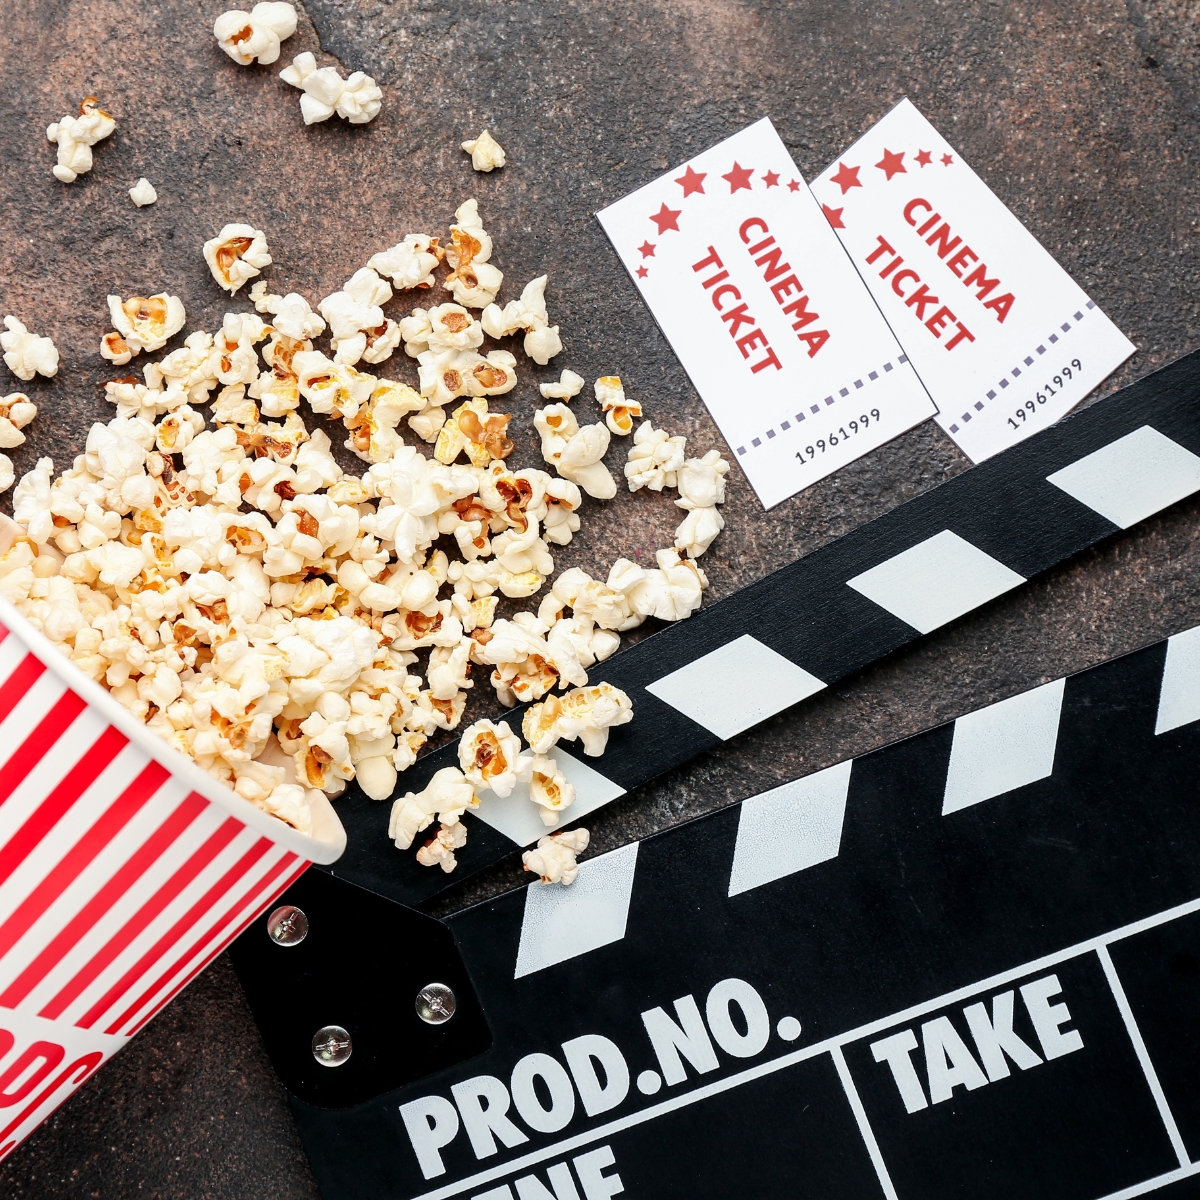 The Future of Cinema: Data and Personalised Movie Recommendations